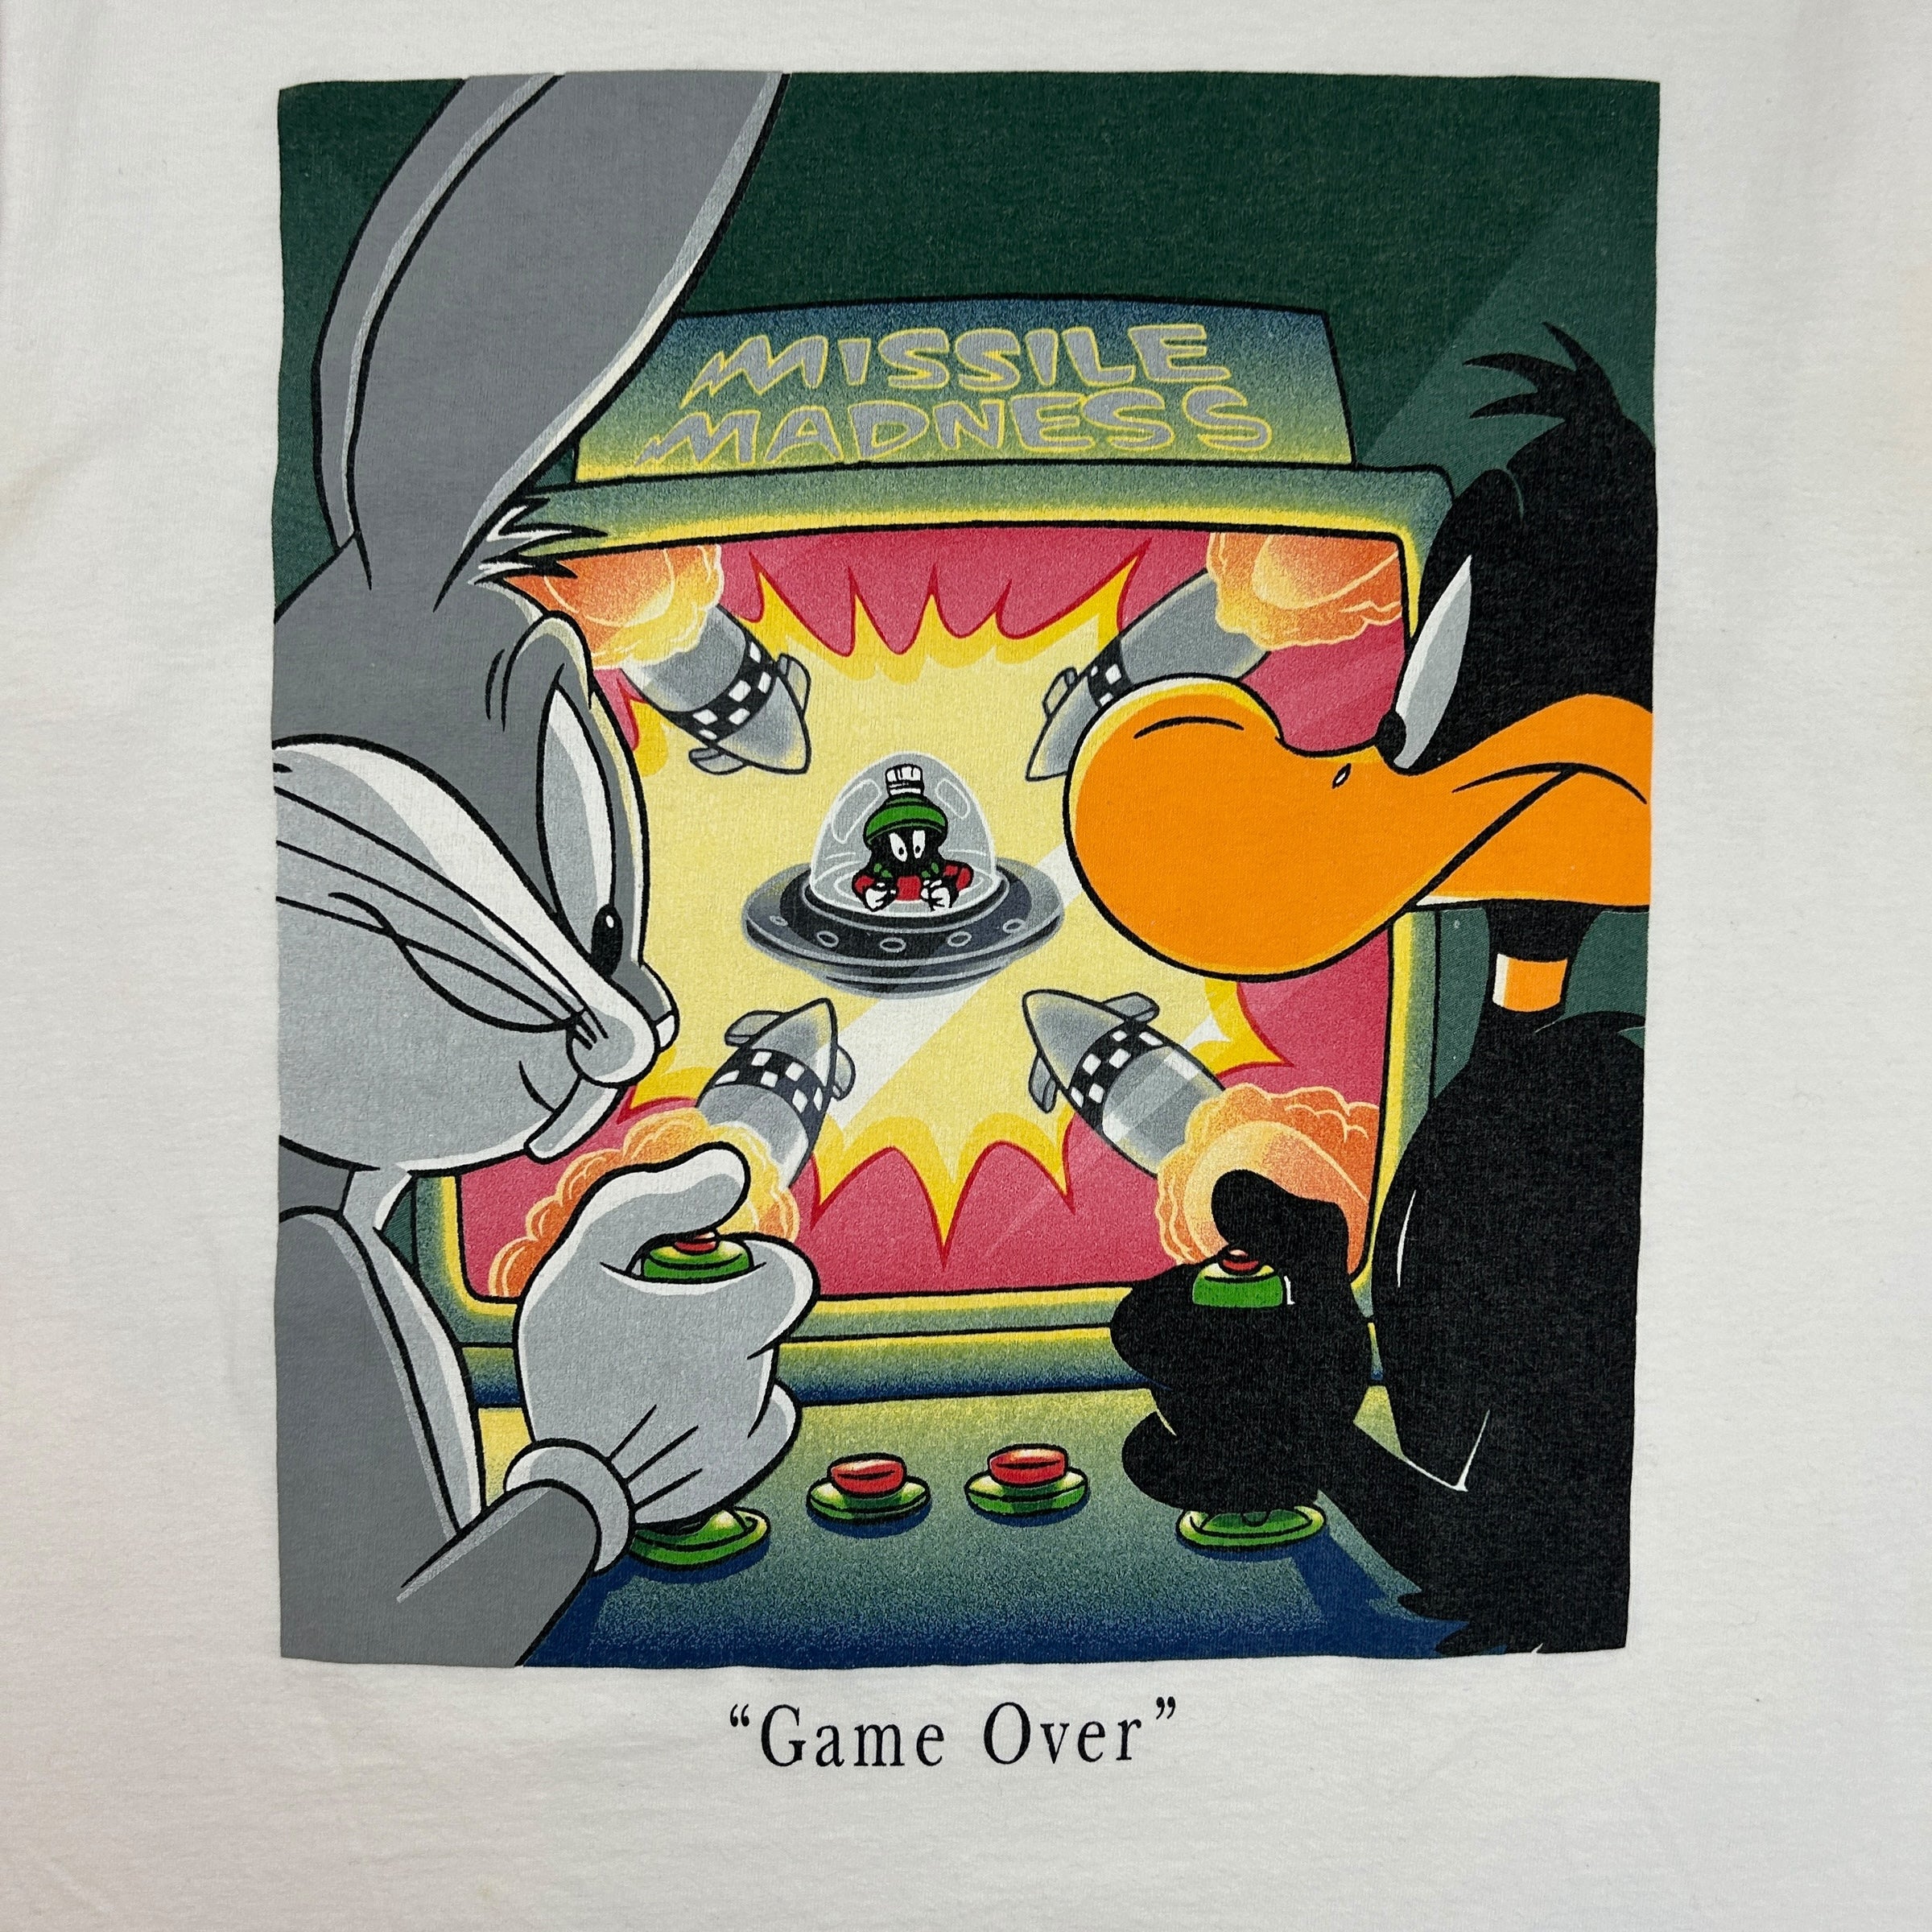 Vintage Looney Tunes Missile Madness T-Shirt White